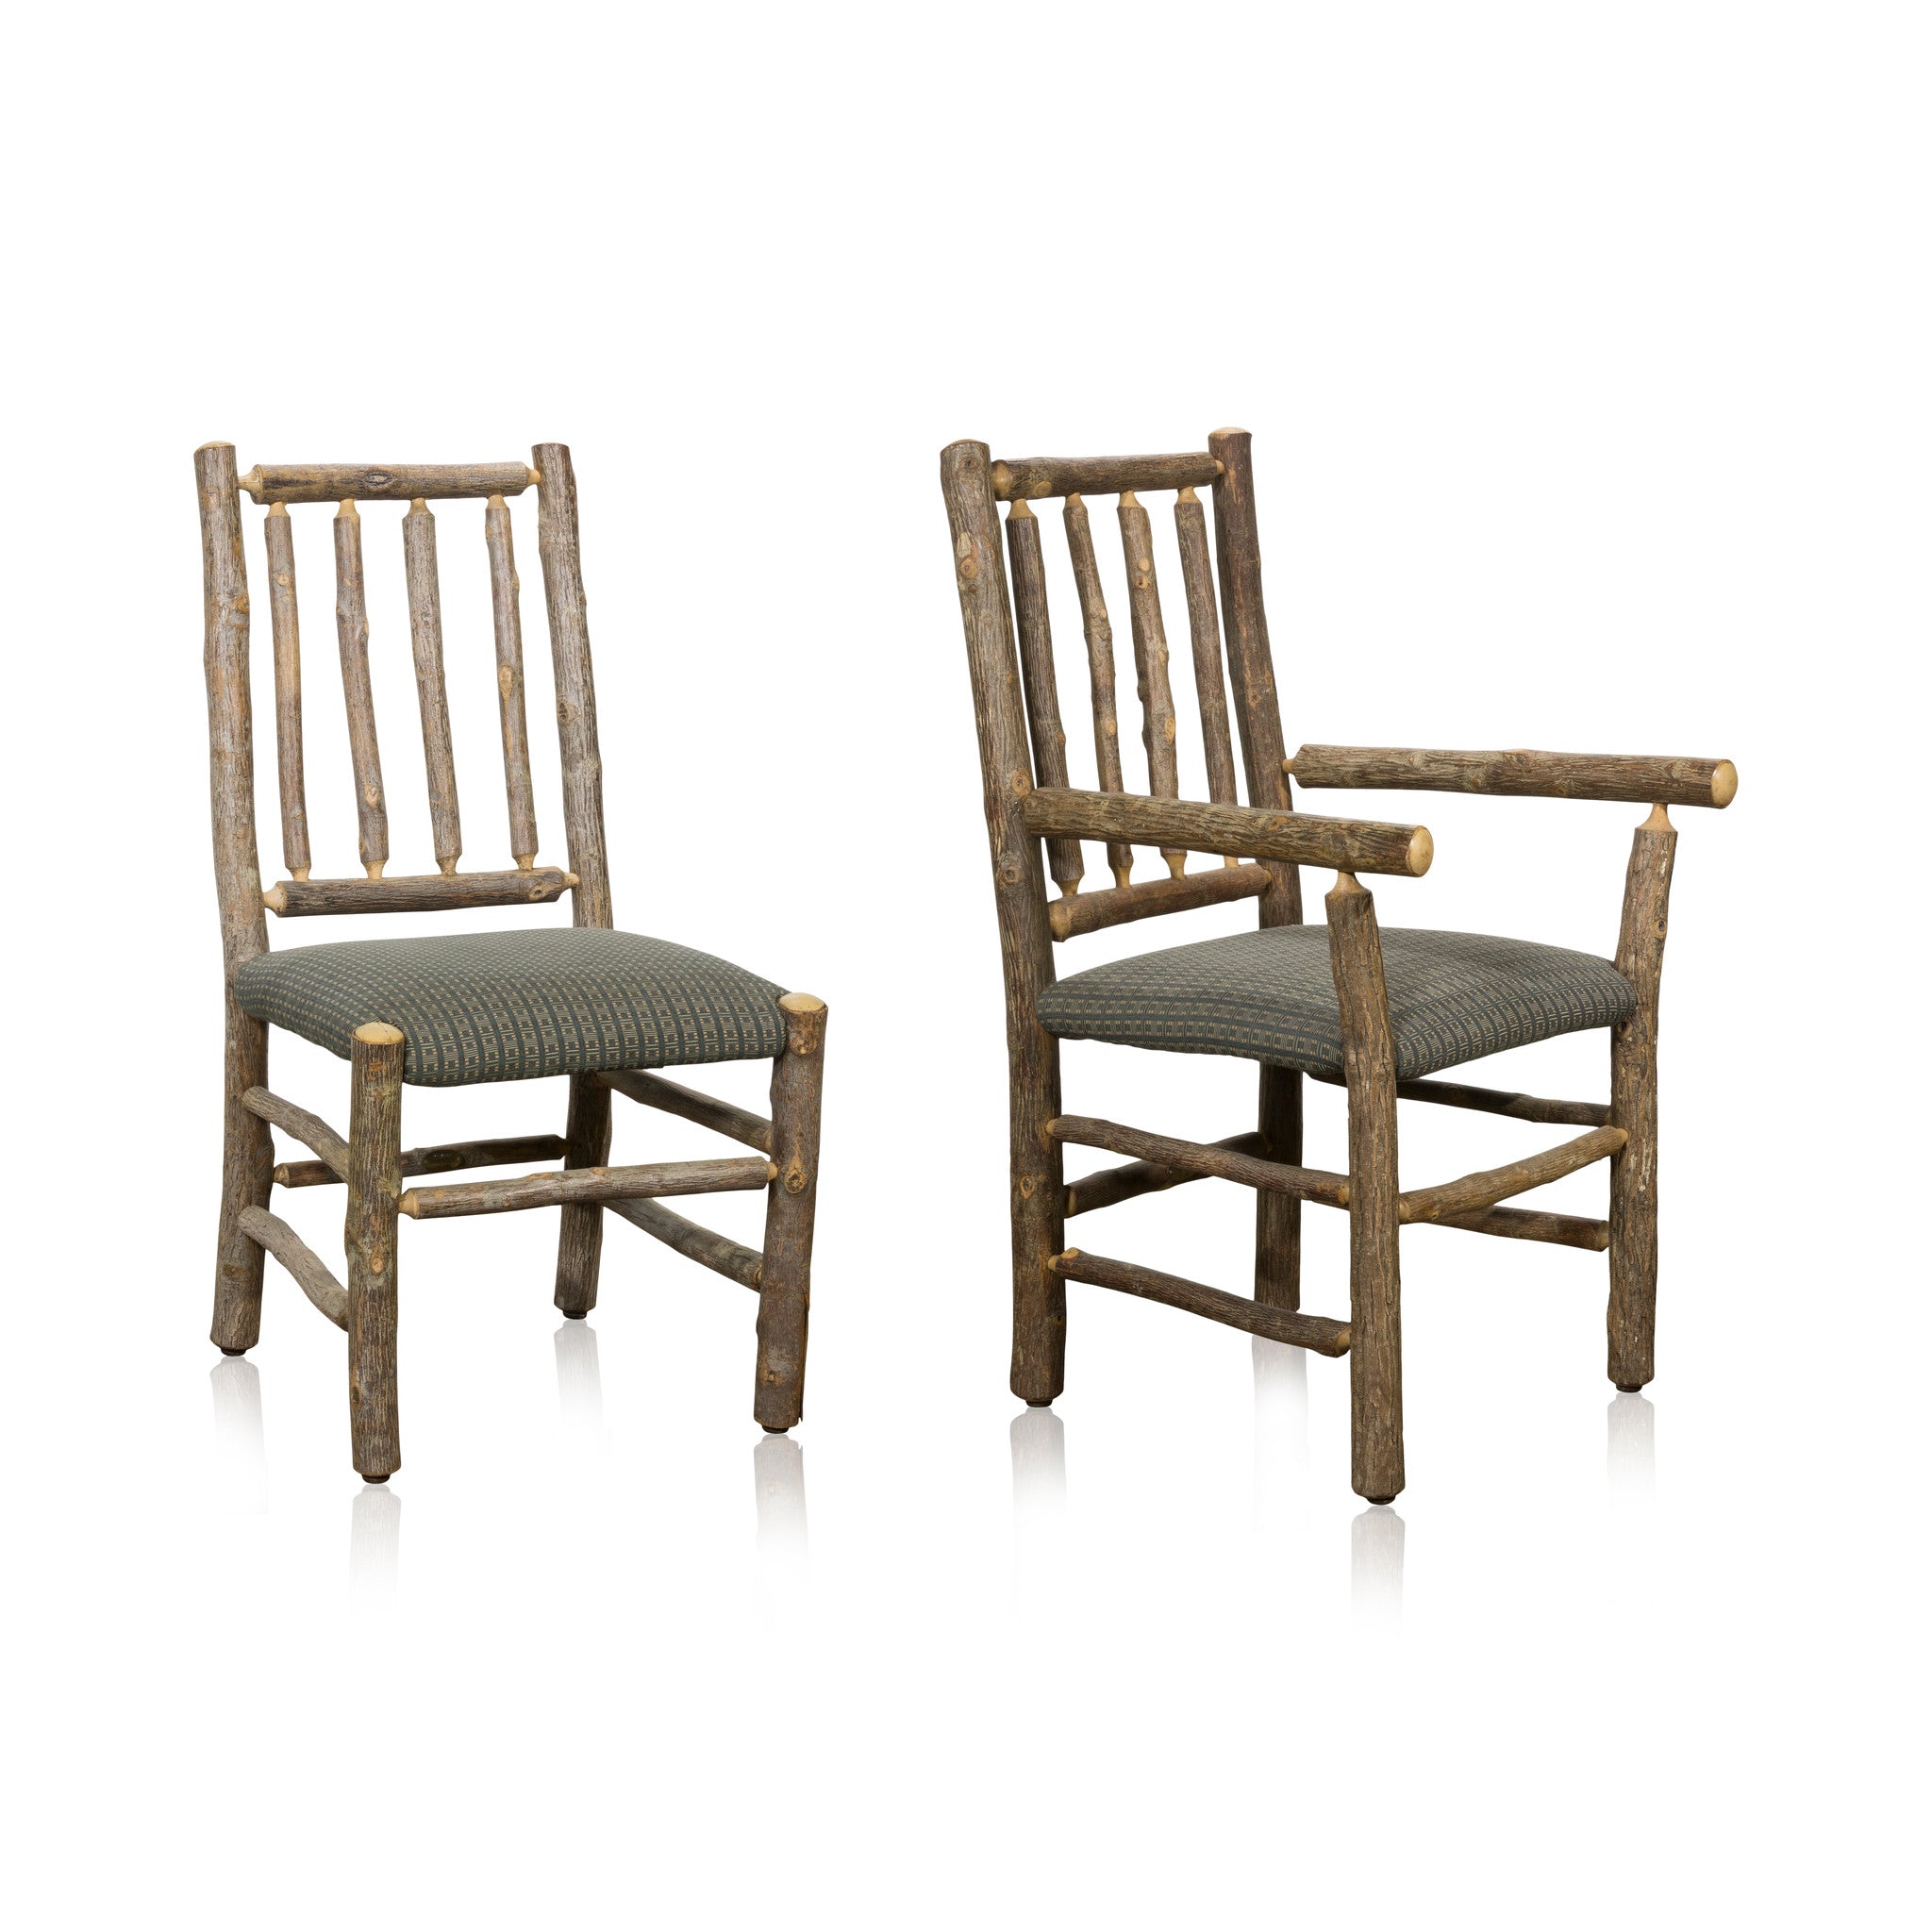 Old Hickory Set of 4 Dining Chairs